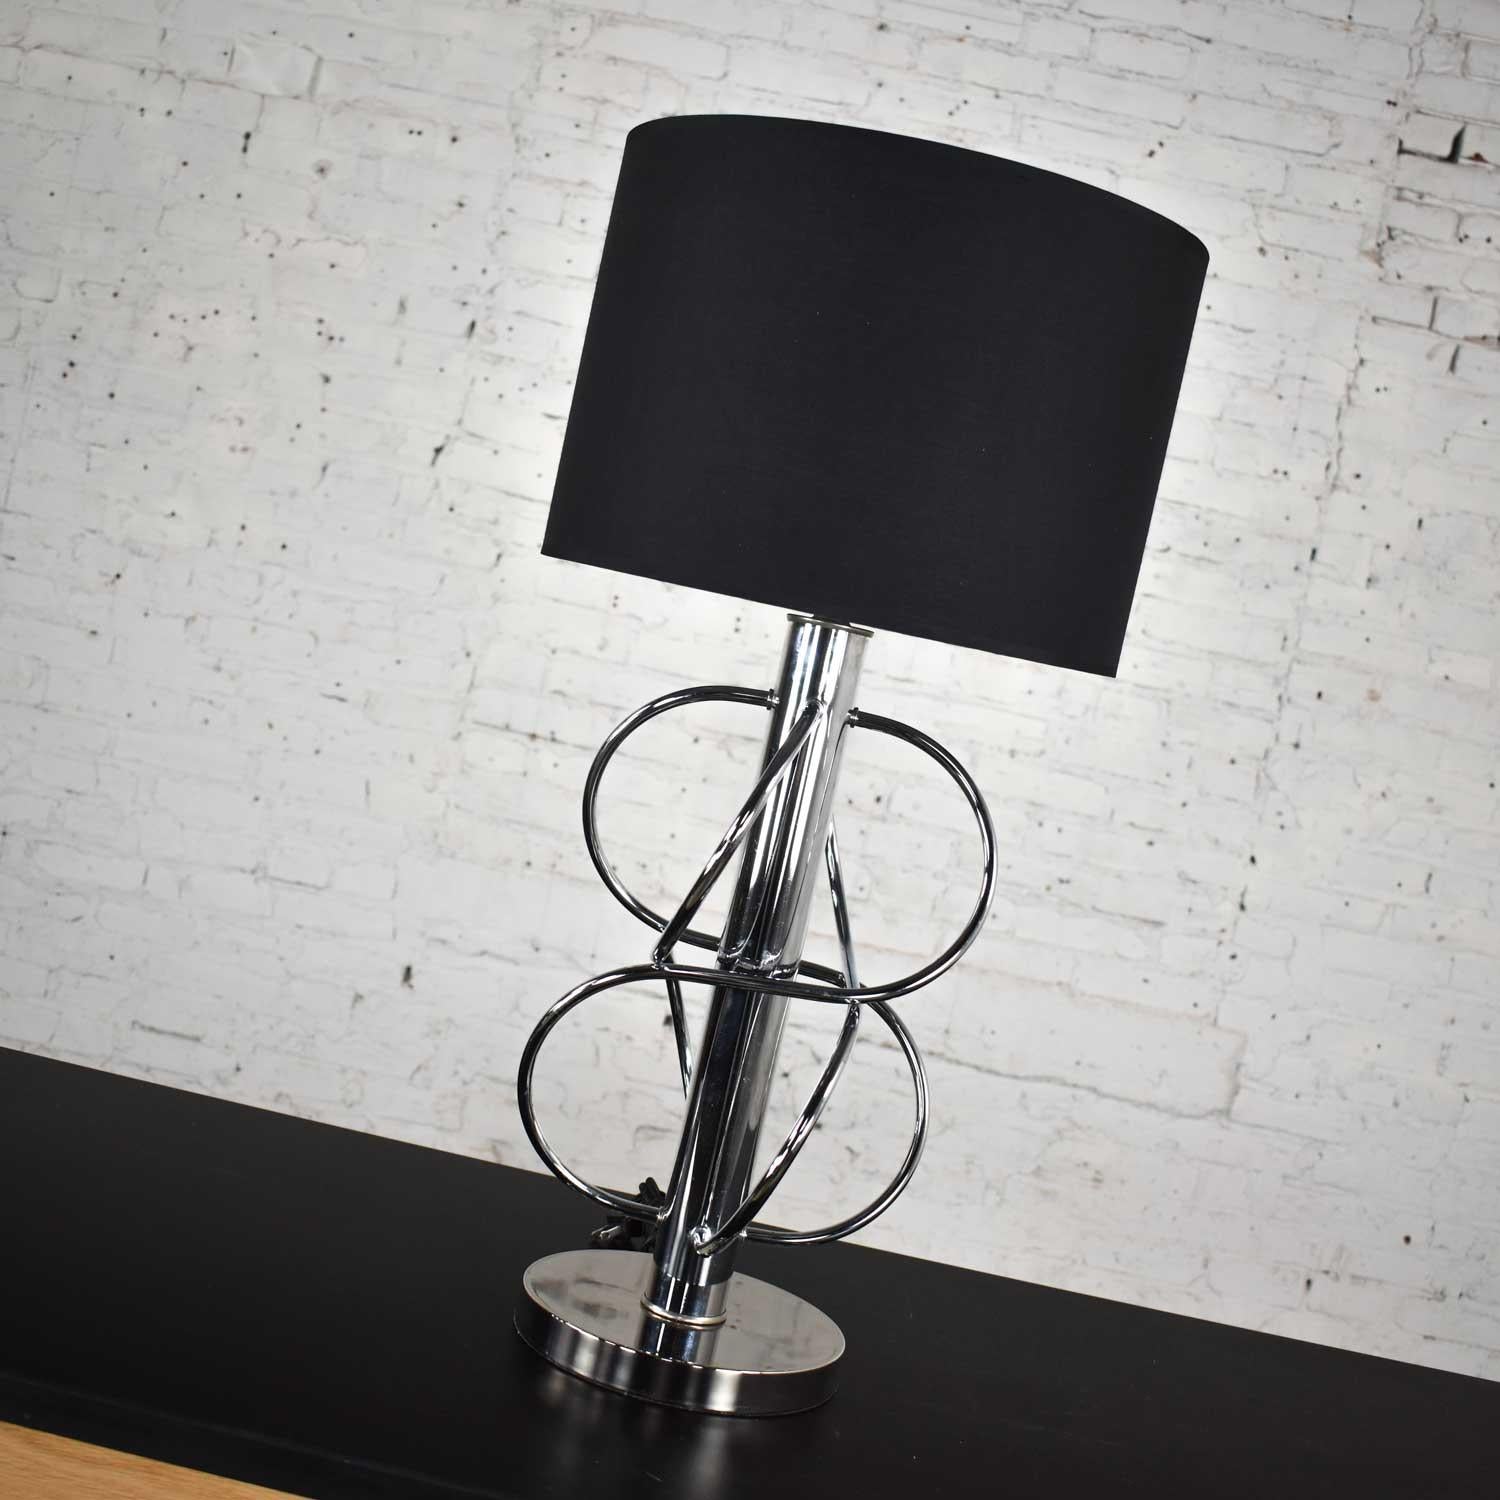 Vintage Mid-Century Modern Polished Chrome Table Lamp New Black Drum Shade For Sale 6